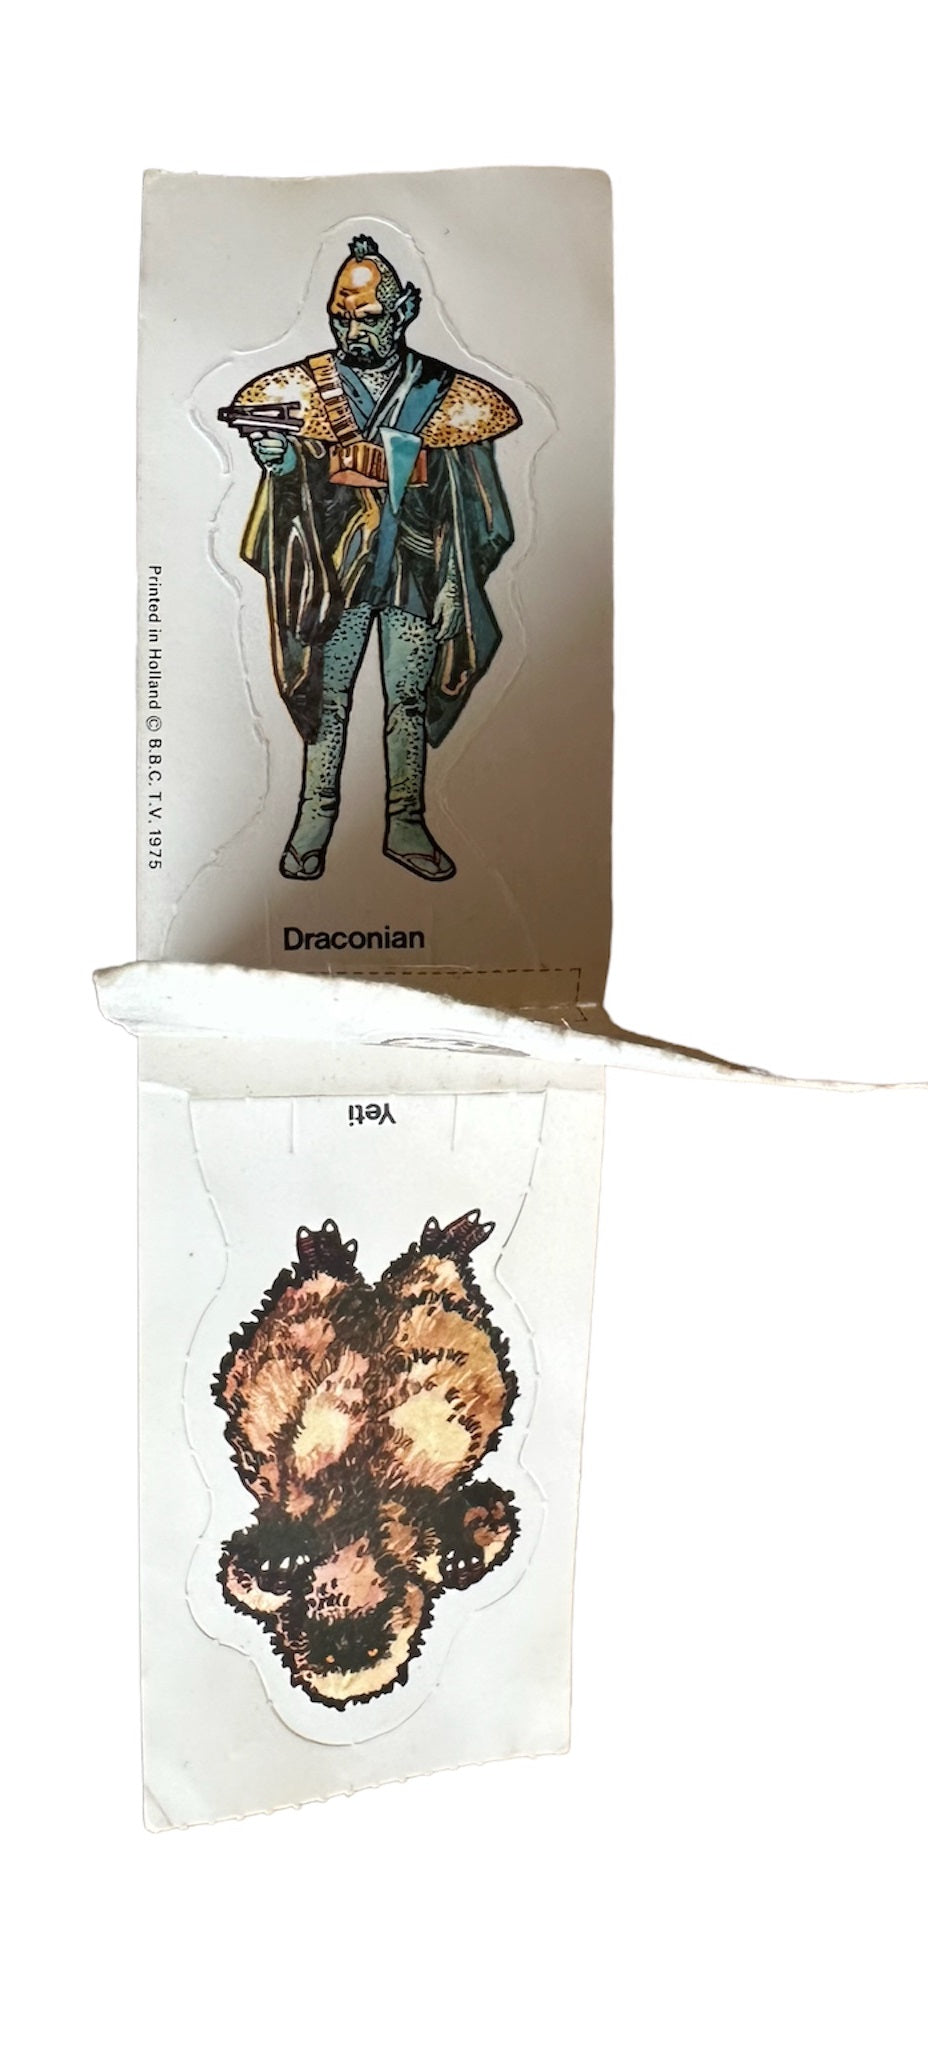 Vintage 1975 Doctor Dr Who Weetabix Set Of Three Unseparated Cards Including - Draconian, Ice Warrior and Yeti - Very Good Condition